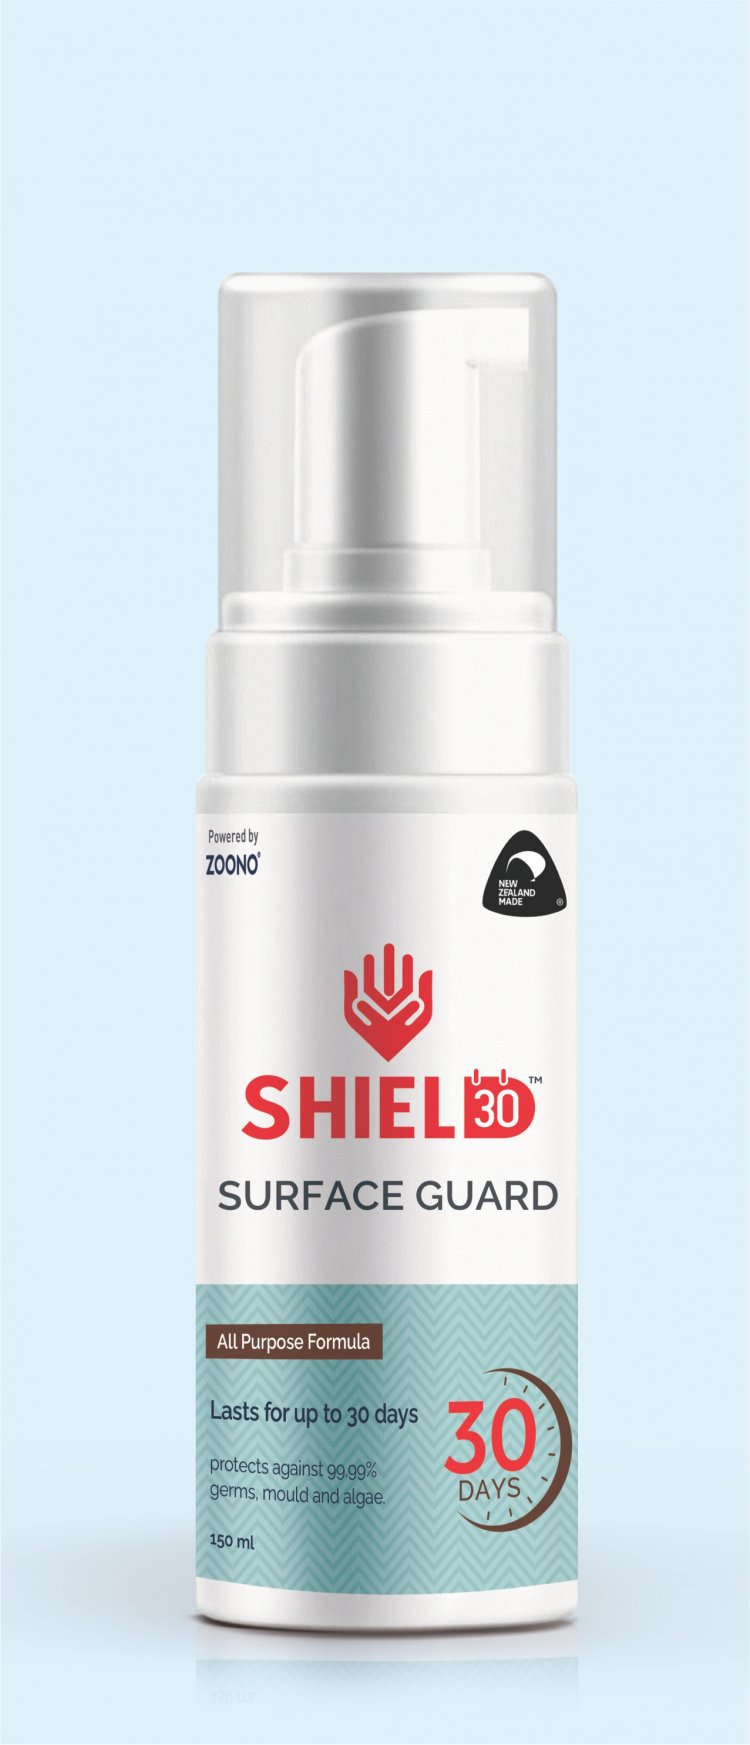 Shield30, a Next-Gen Sanitization Technology that Provides 99.99% Protection from Surface-borne Covid Infection, Launched